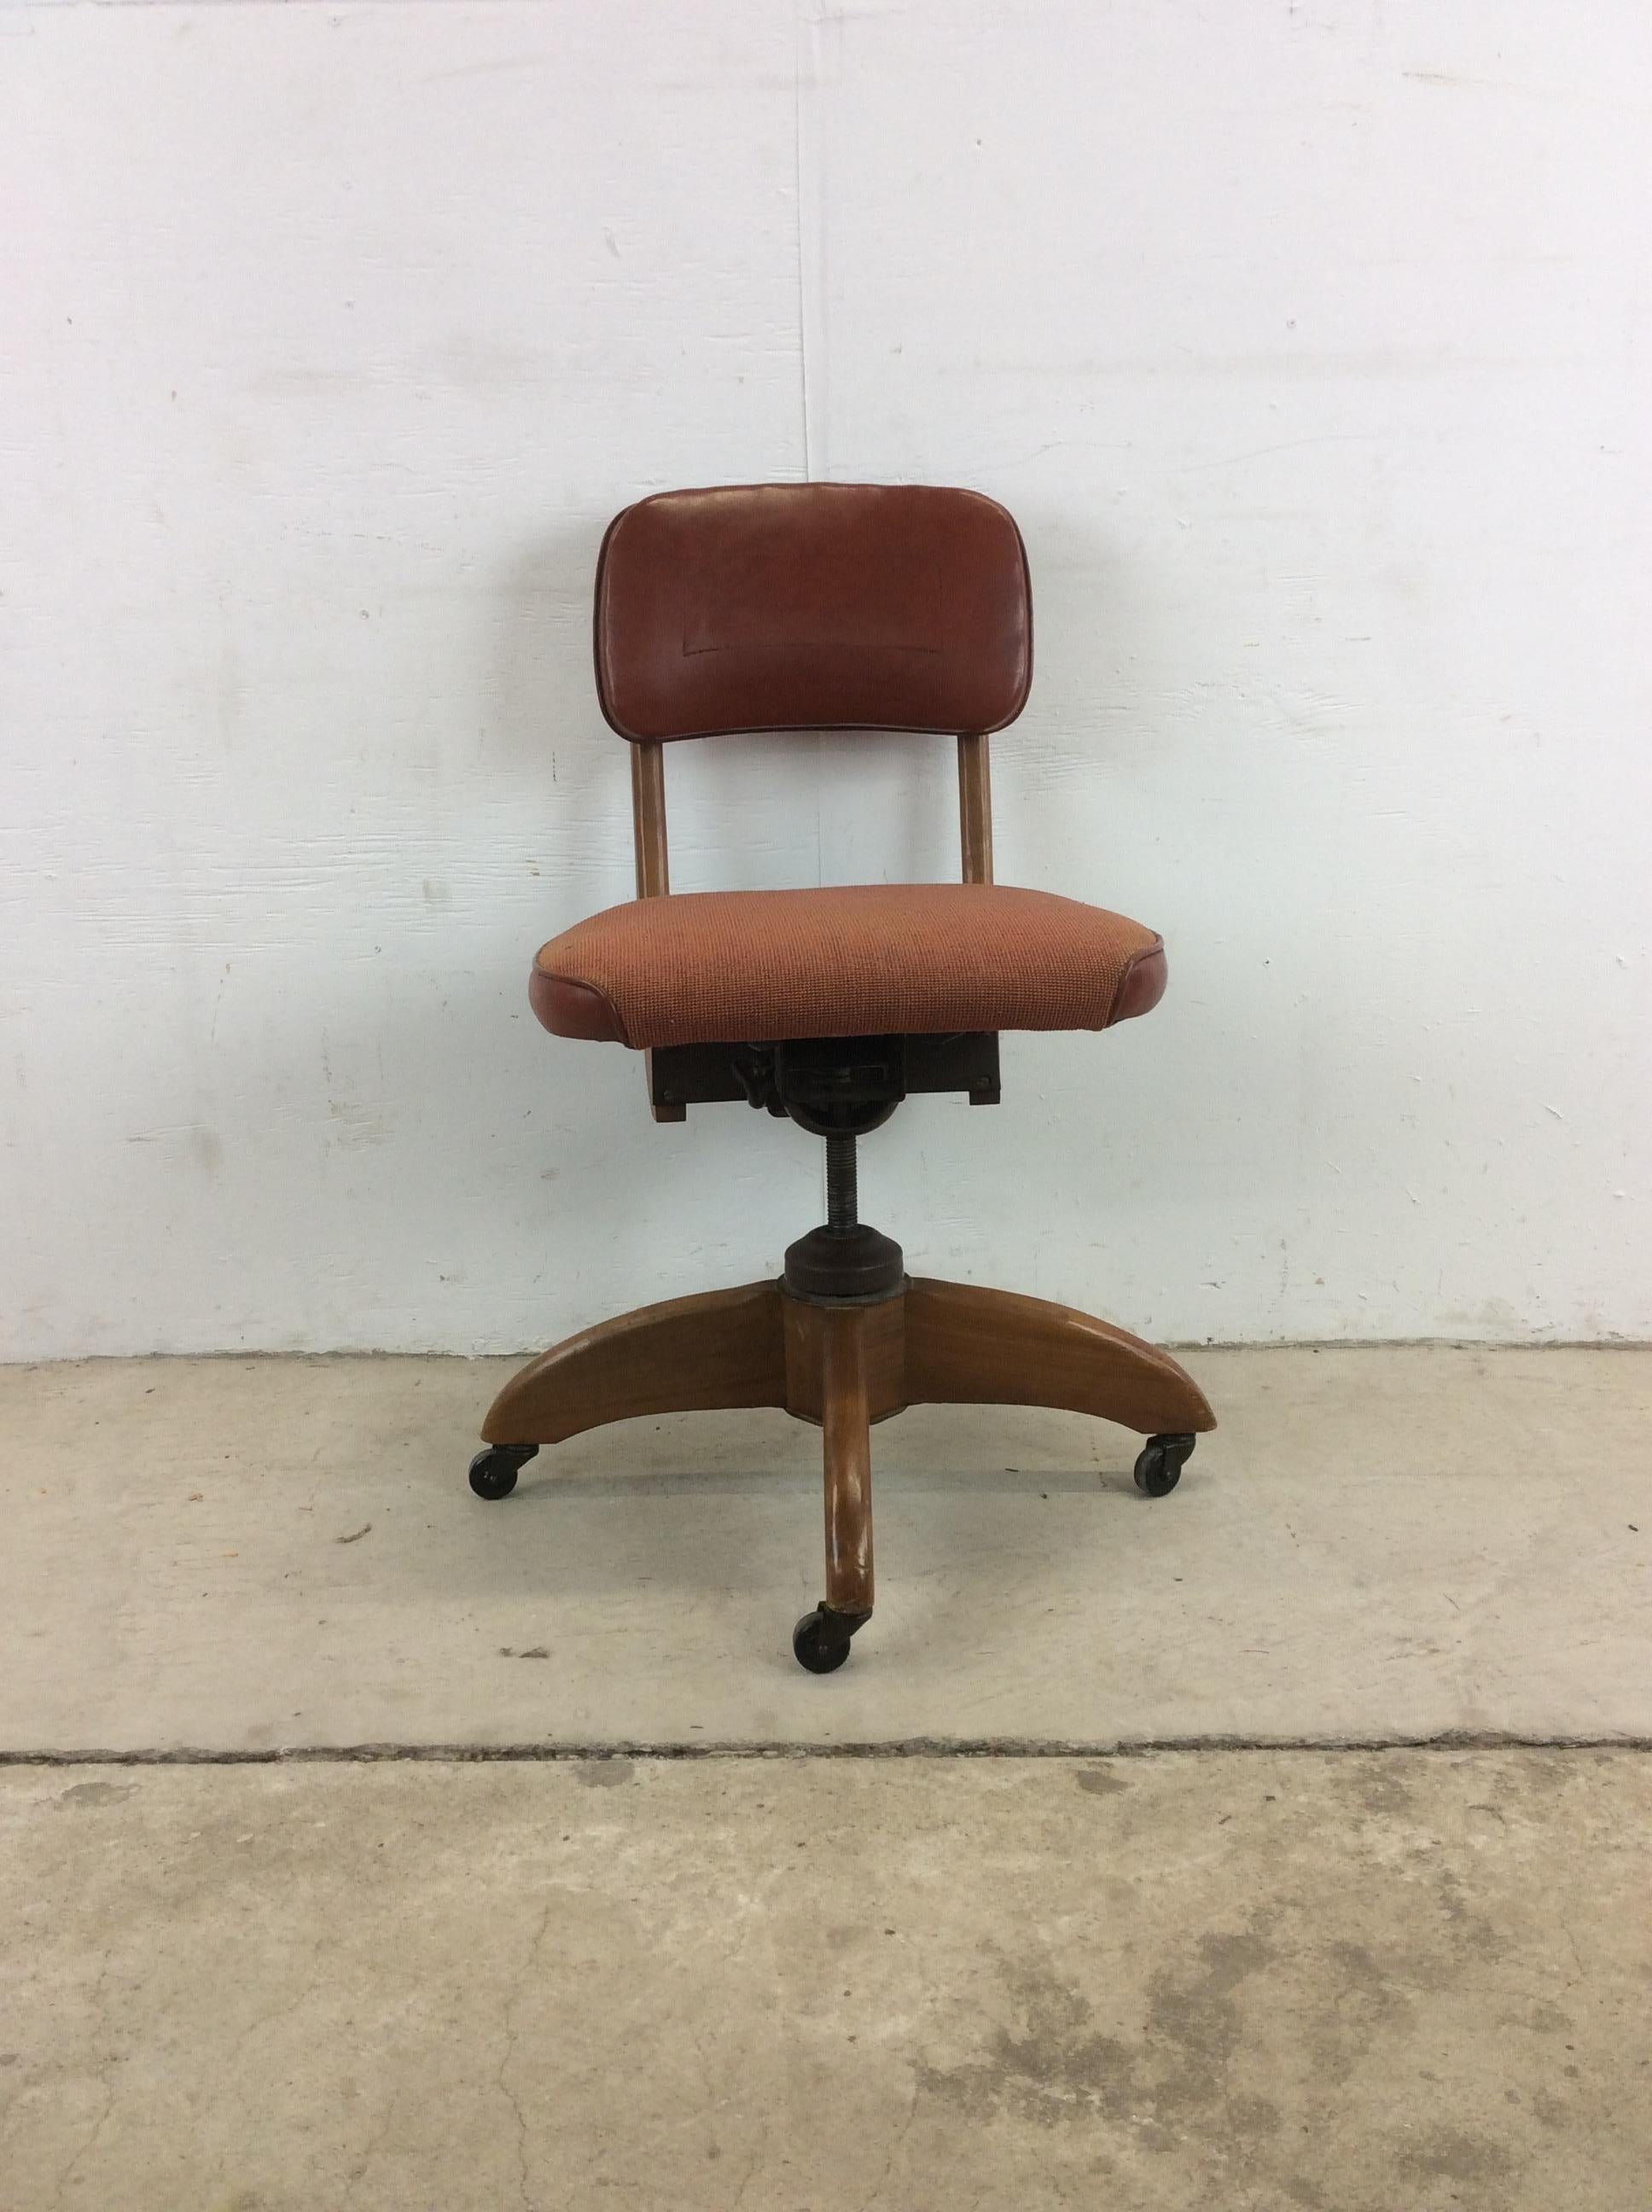 This mid century modern desk chair by Chromcraft features hardwood frame, original medium tone finish, orange fabric upholstered adjustable seat, vinyl seat back, and castor wheels.

Dimensions: 18w 24.25d 32h 19.25sh 



